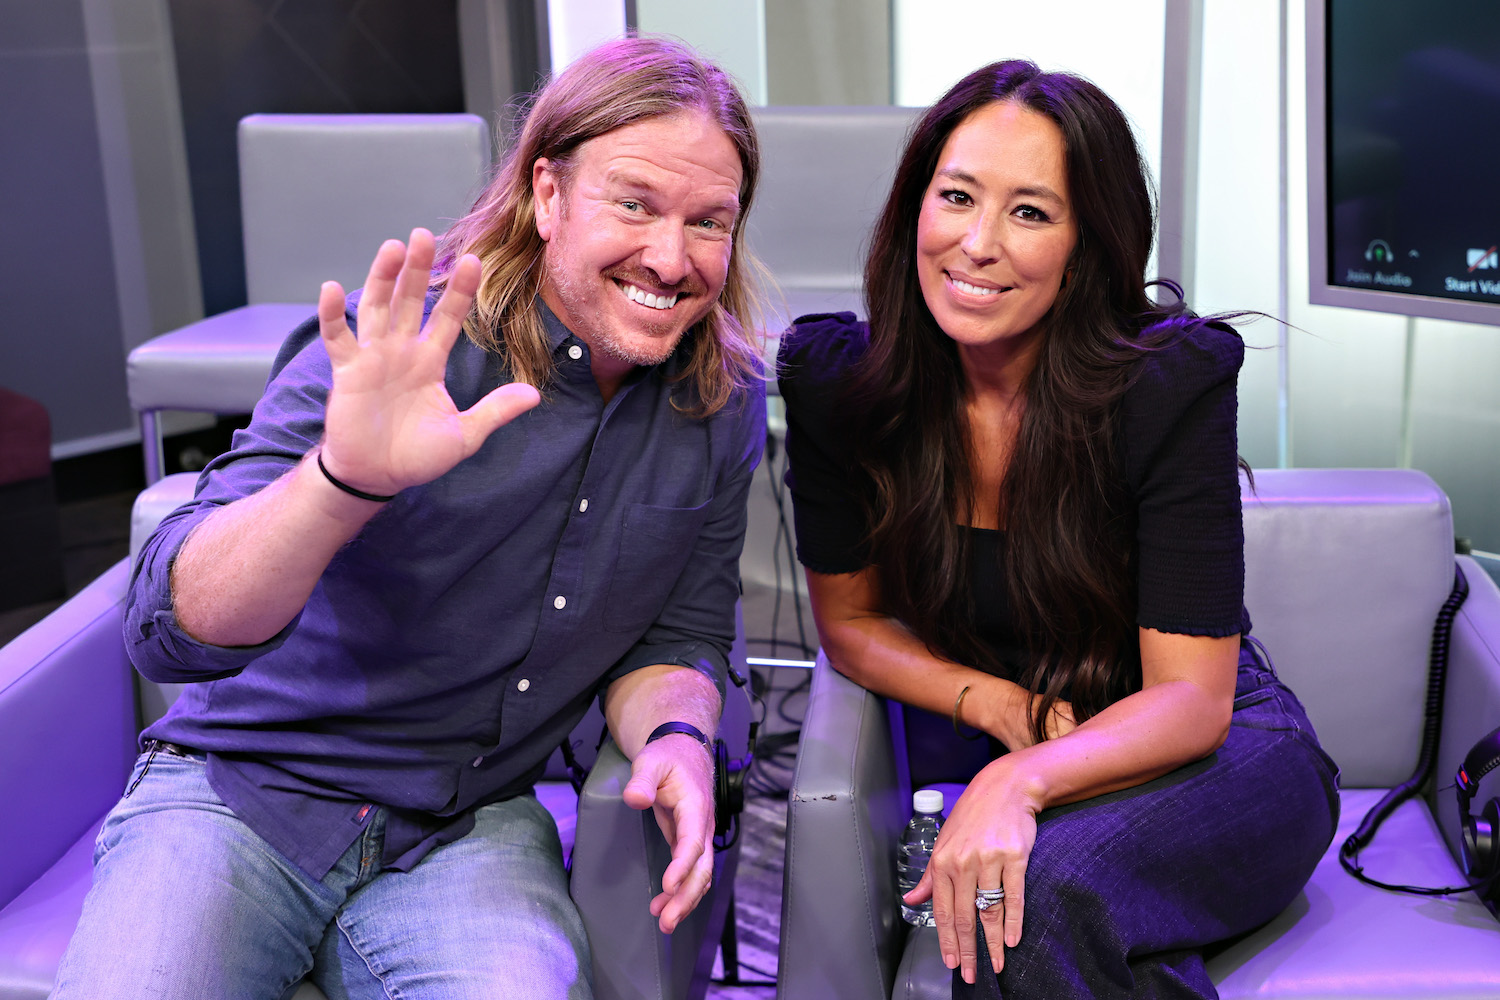 Chip Gaines smiles and waves sitting next to Joanna Gaines smiling